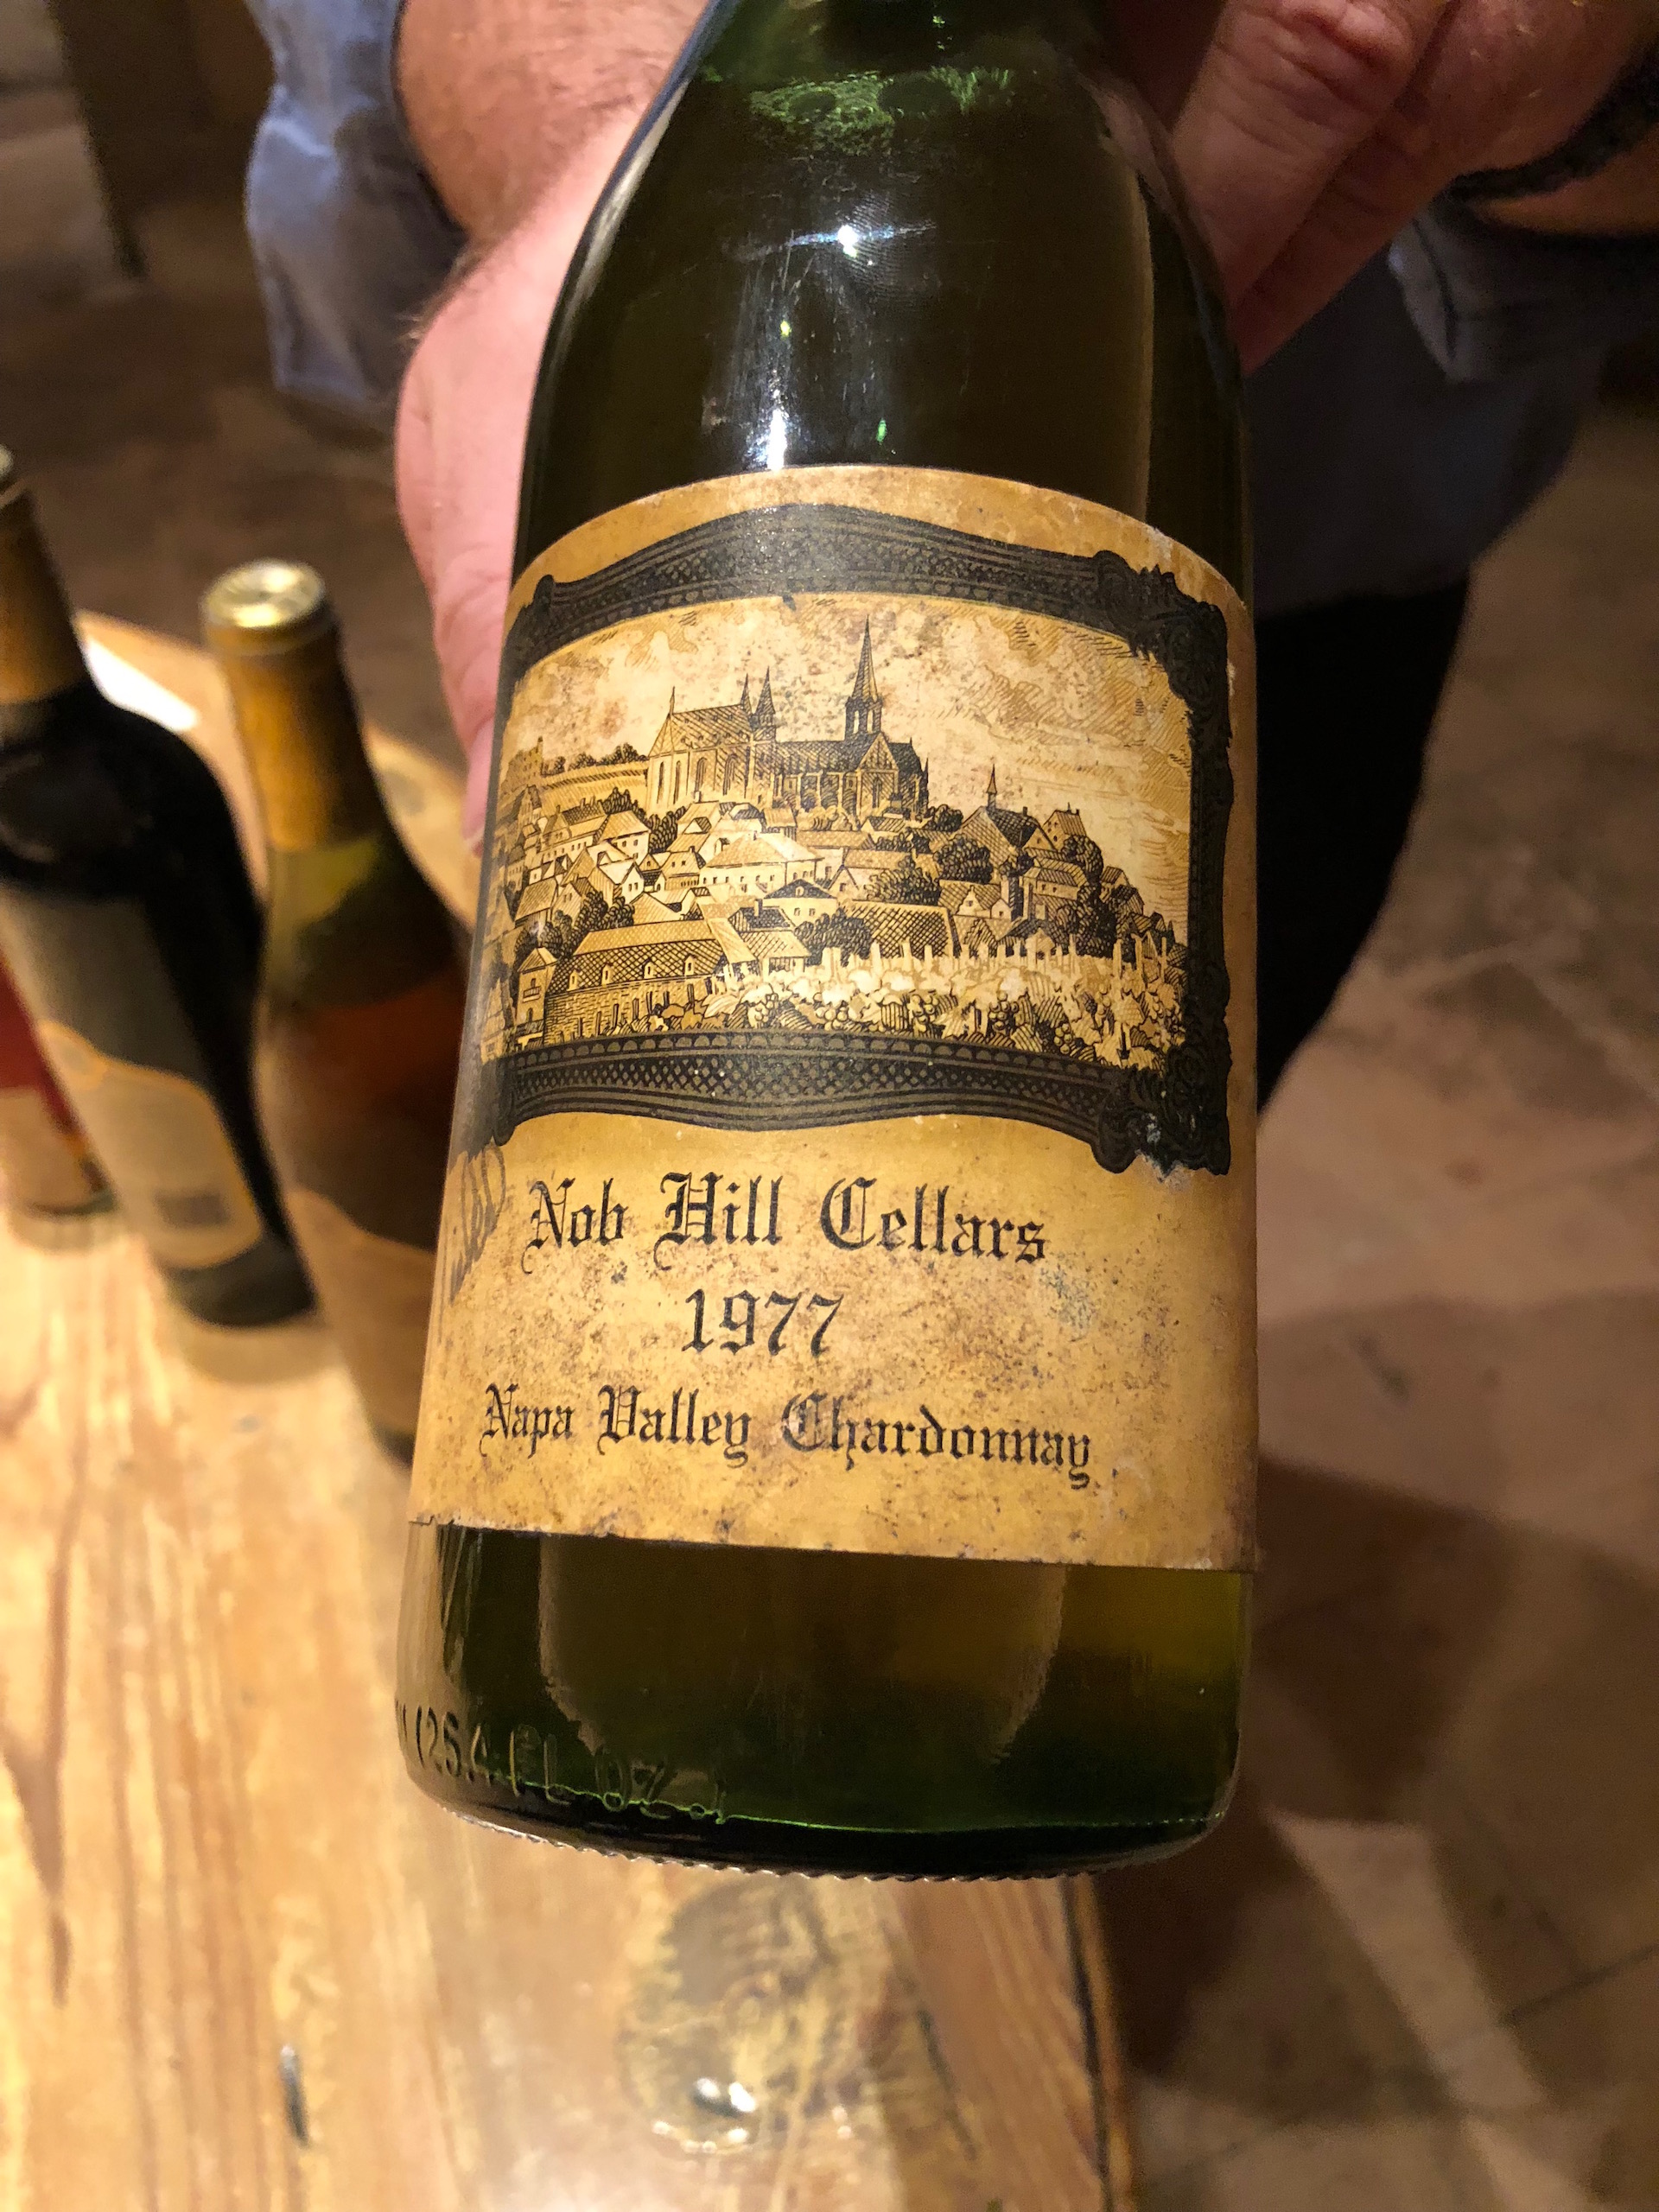 Far Niente’s predecessor — a 1977 bottle of Nob Hill Cellars by Far Niente founder Gil Nickel who bought an apartment on Nob Hill in San Francisco with winemaking equipment, which started off his illustrious wine career